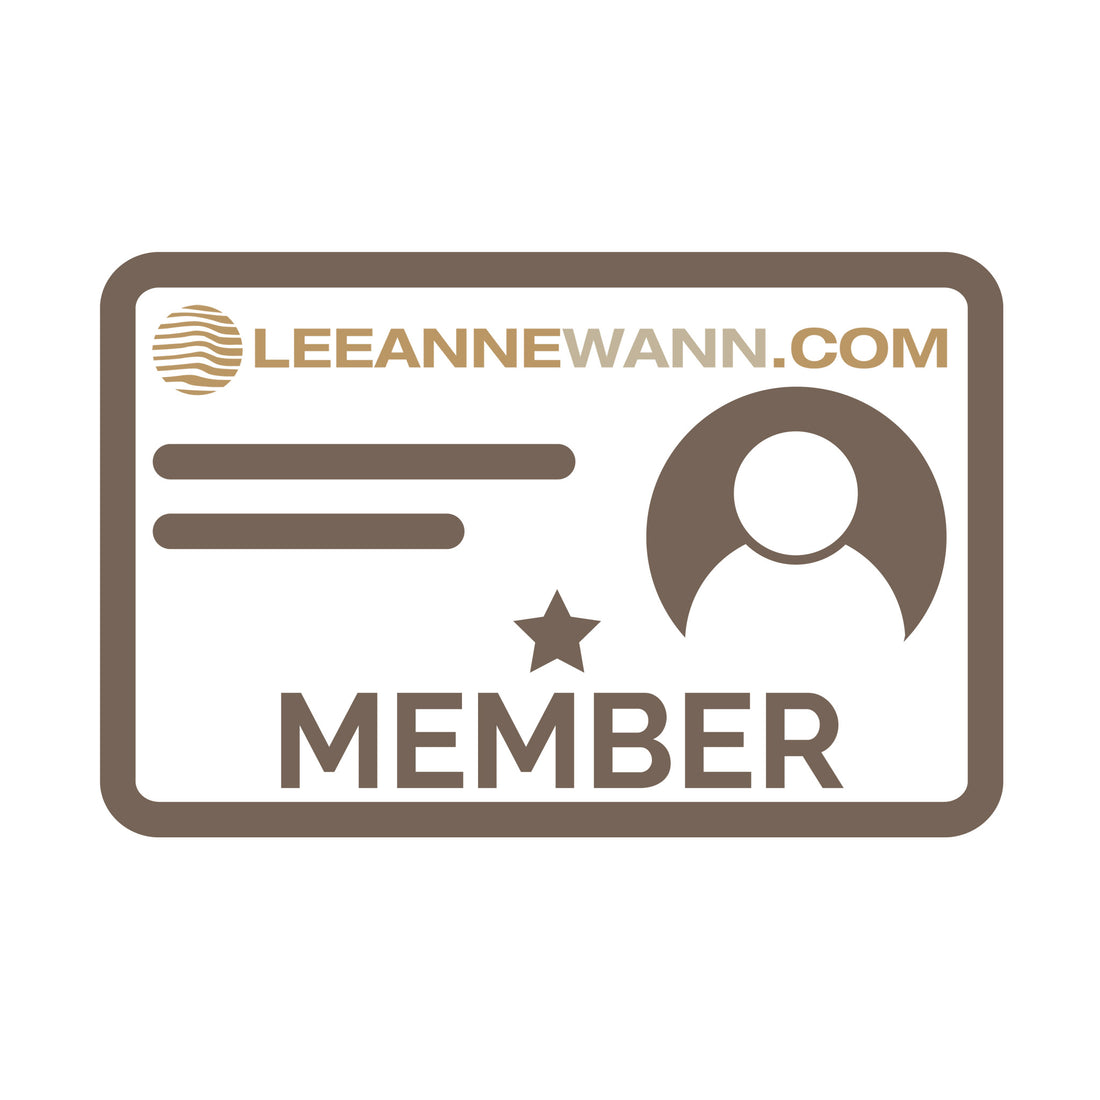 Lee-Anne Wann Membership - Helping you lead your best life